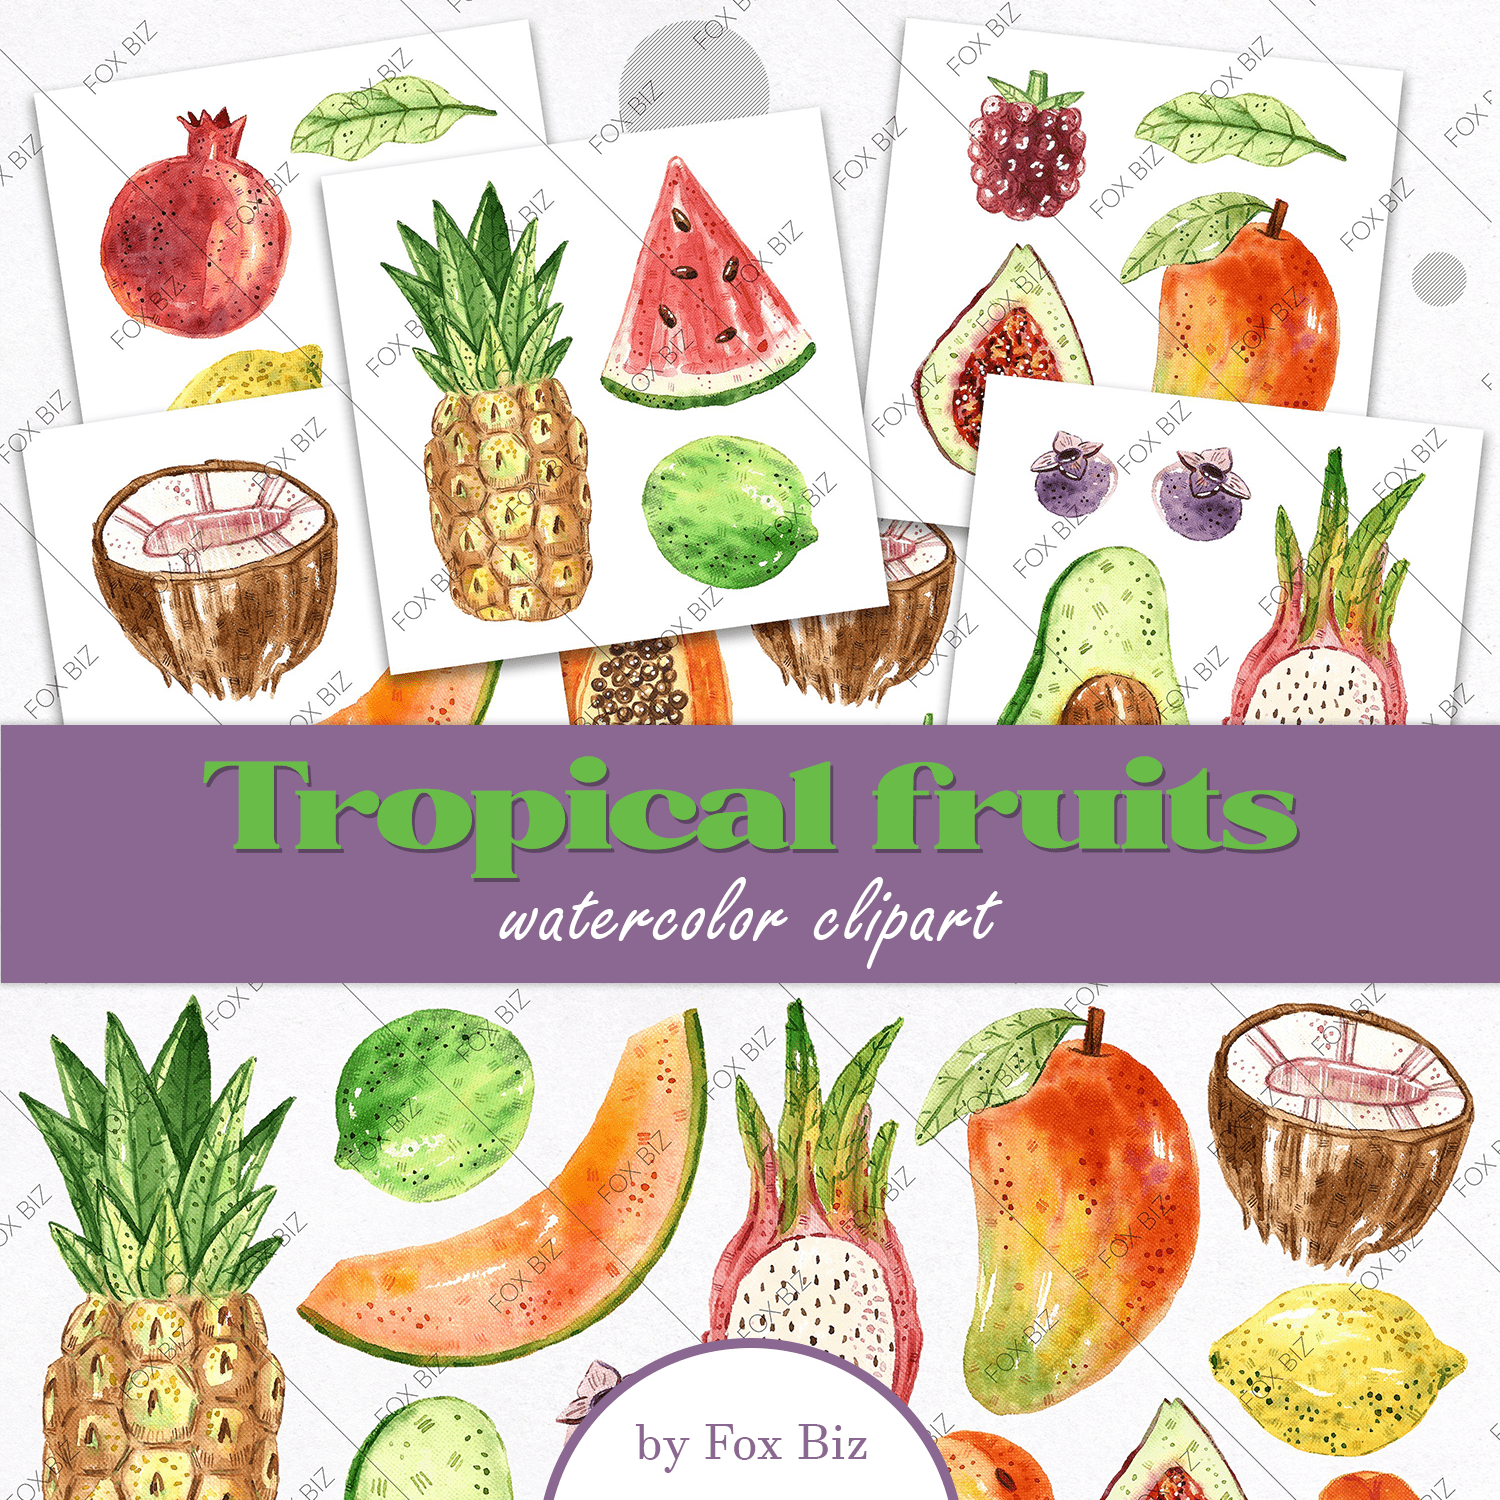 Tropical fruits watercolor clipart created by Fox Biz.